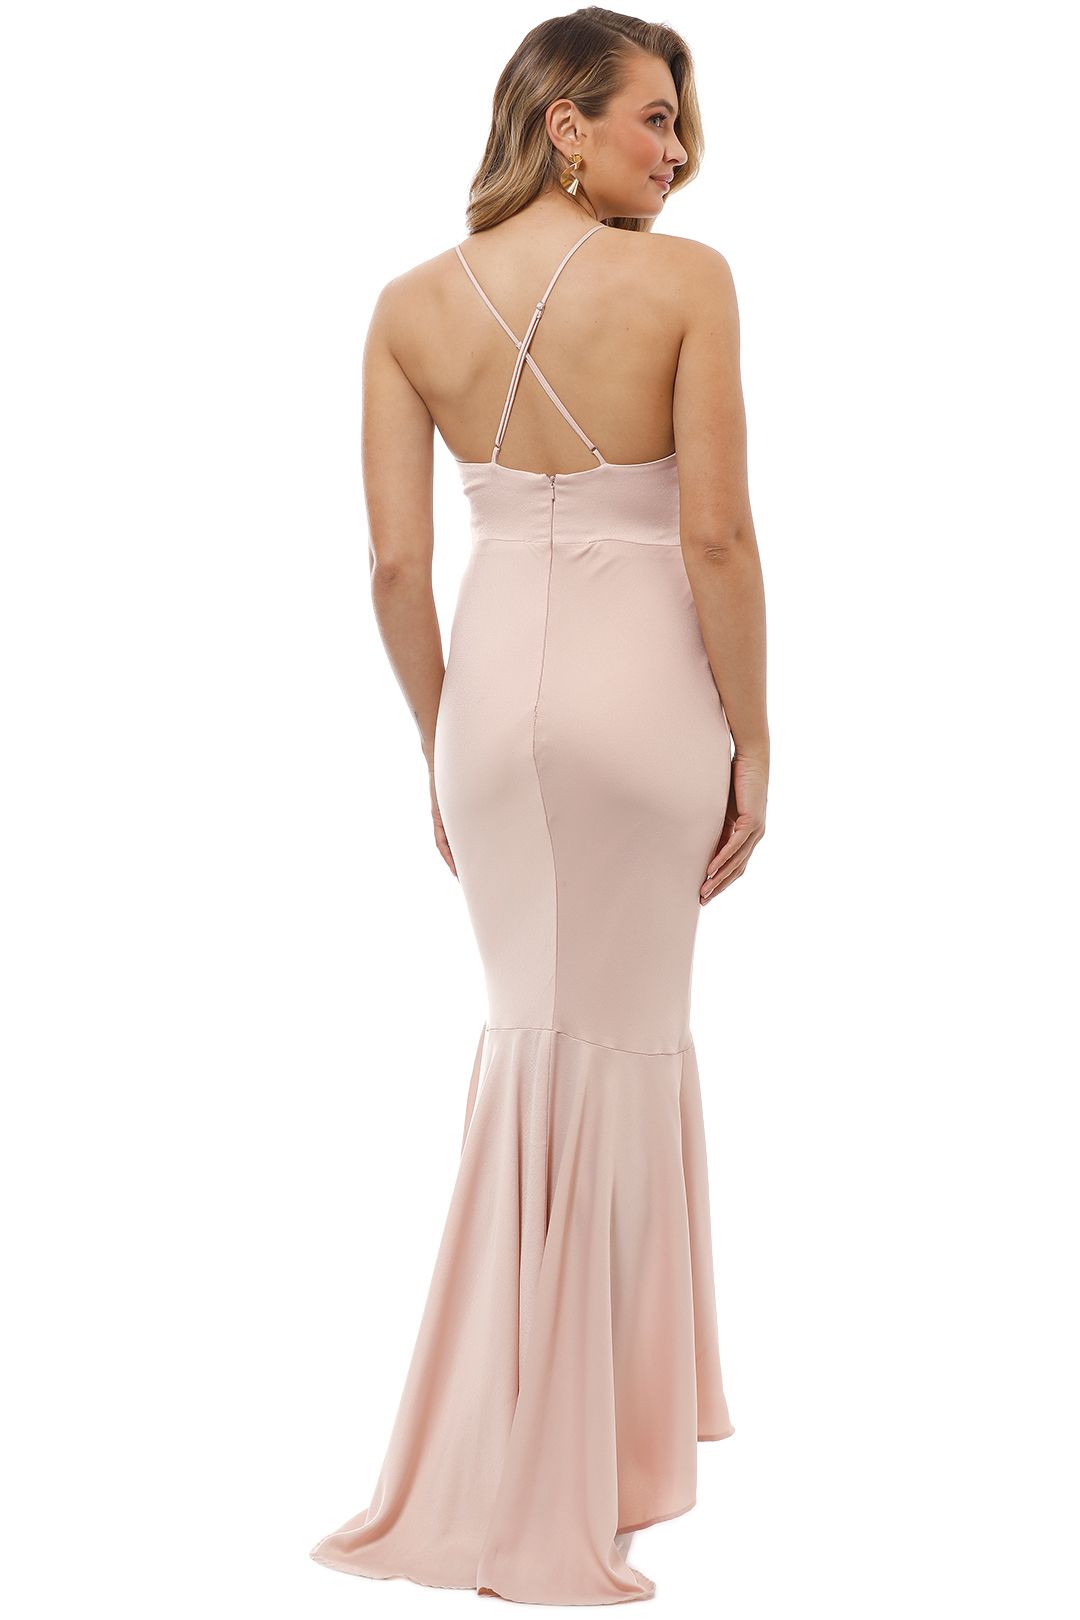 Grace and Hart - Juilets Delight Gown - Blush - Back